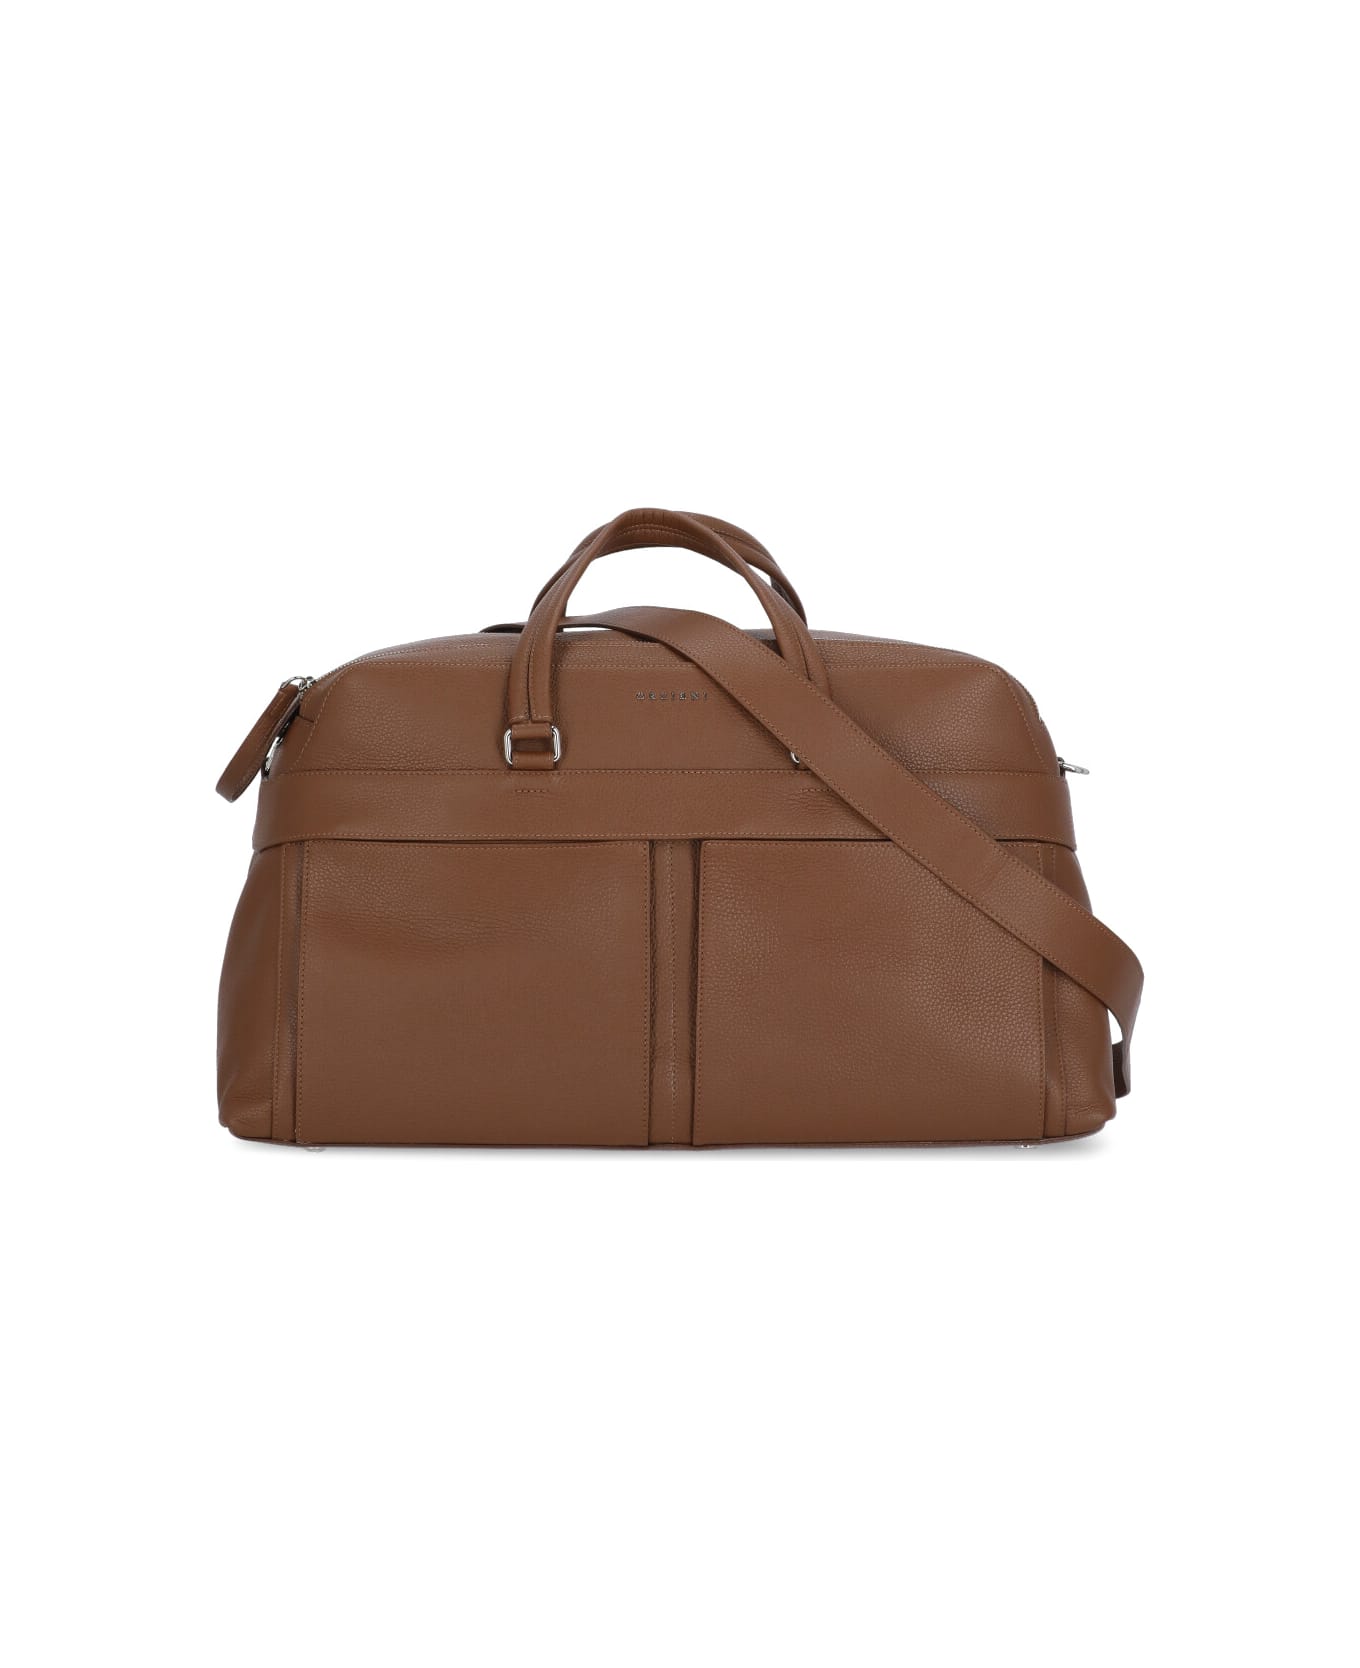 Orciani Micron Pebbled Leather Travel Bag - Brown